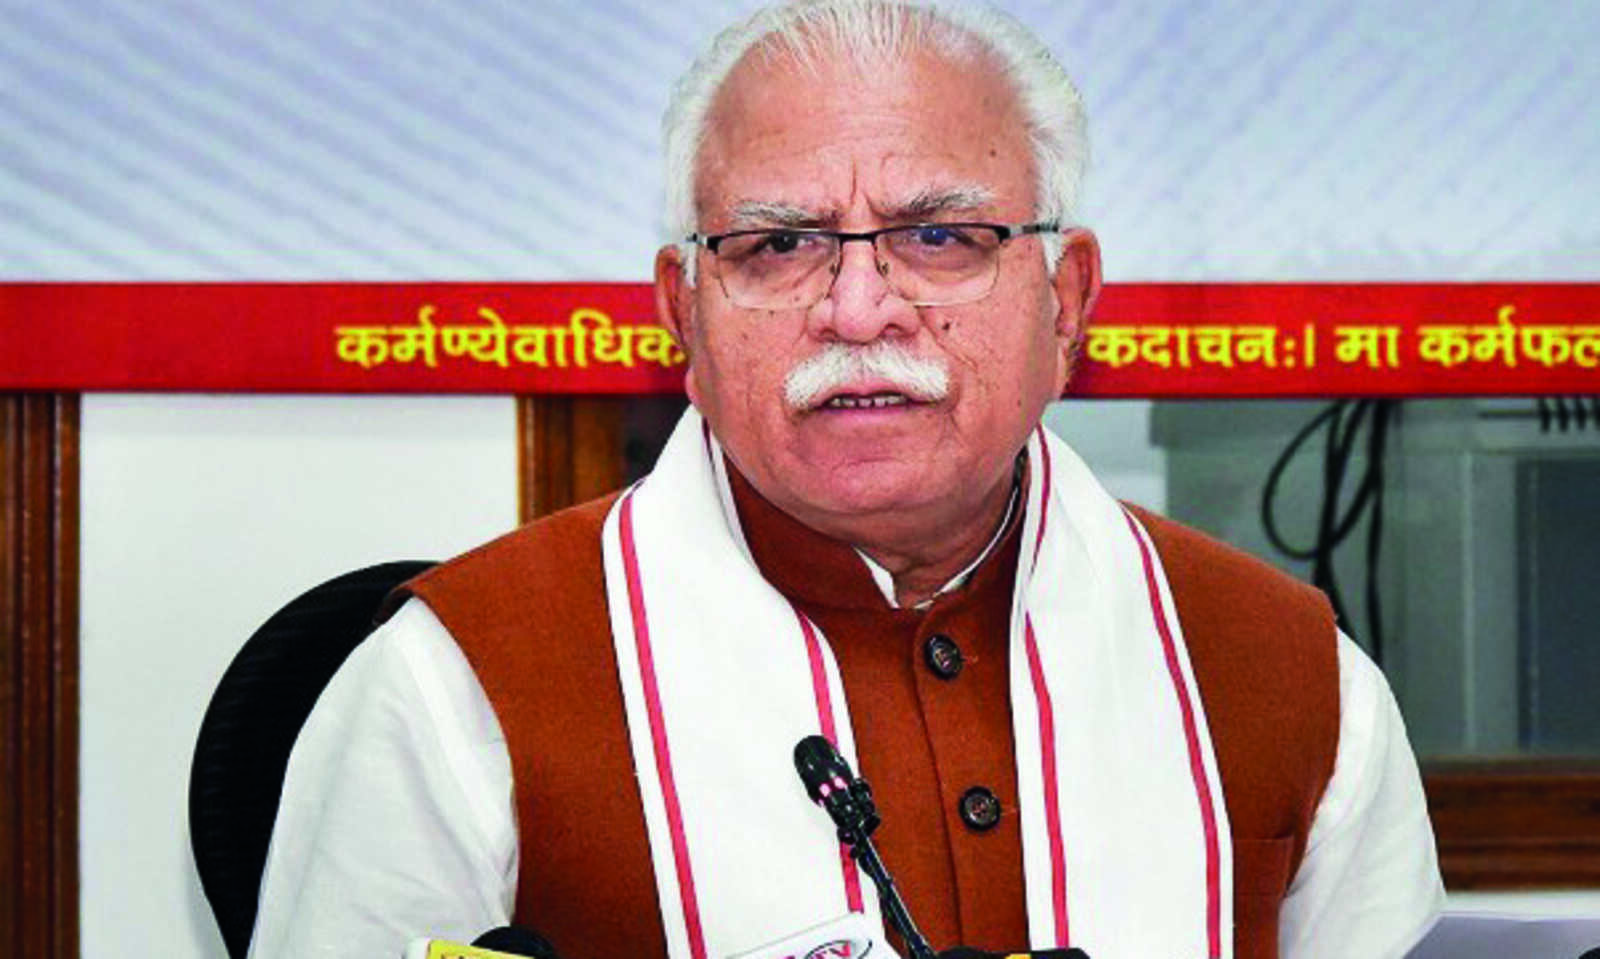 Haryana provides Delhi with more water than its fixed share, says Khattar